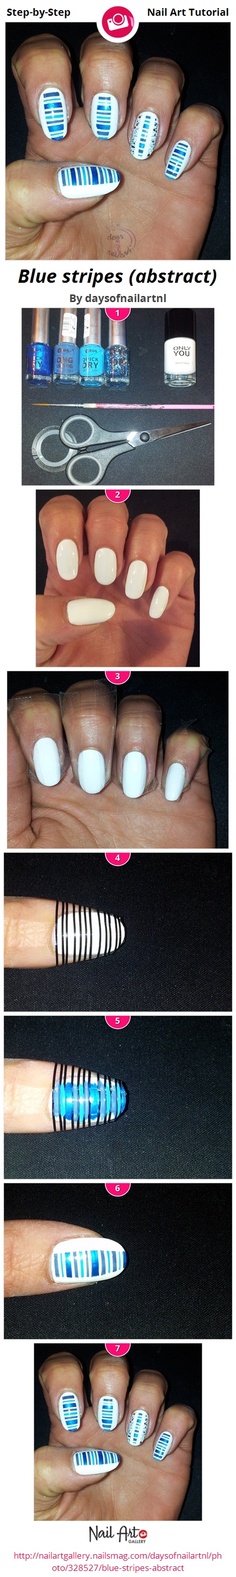 22 New Nails Tutorials you have to try (12)